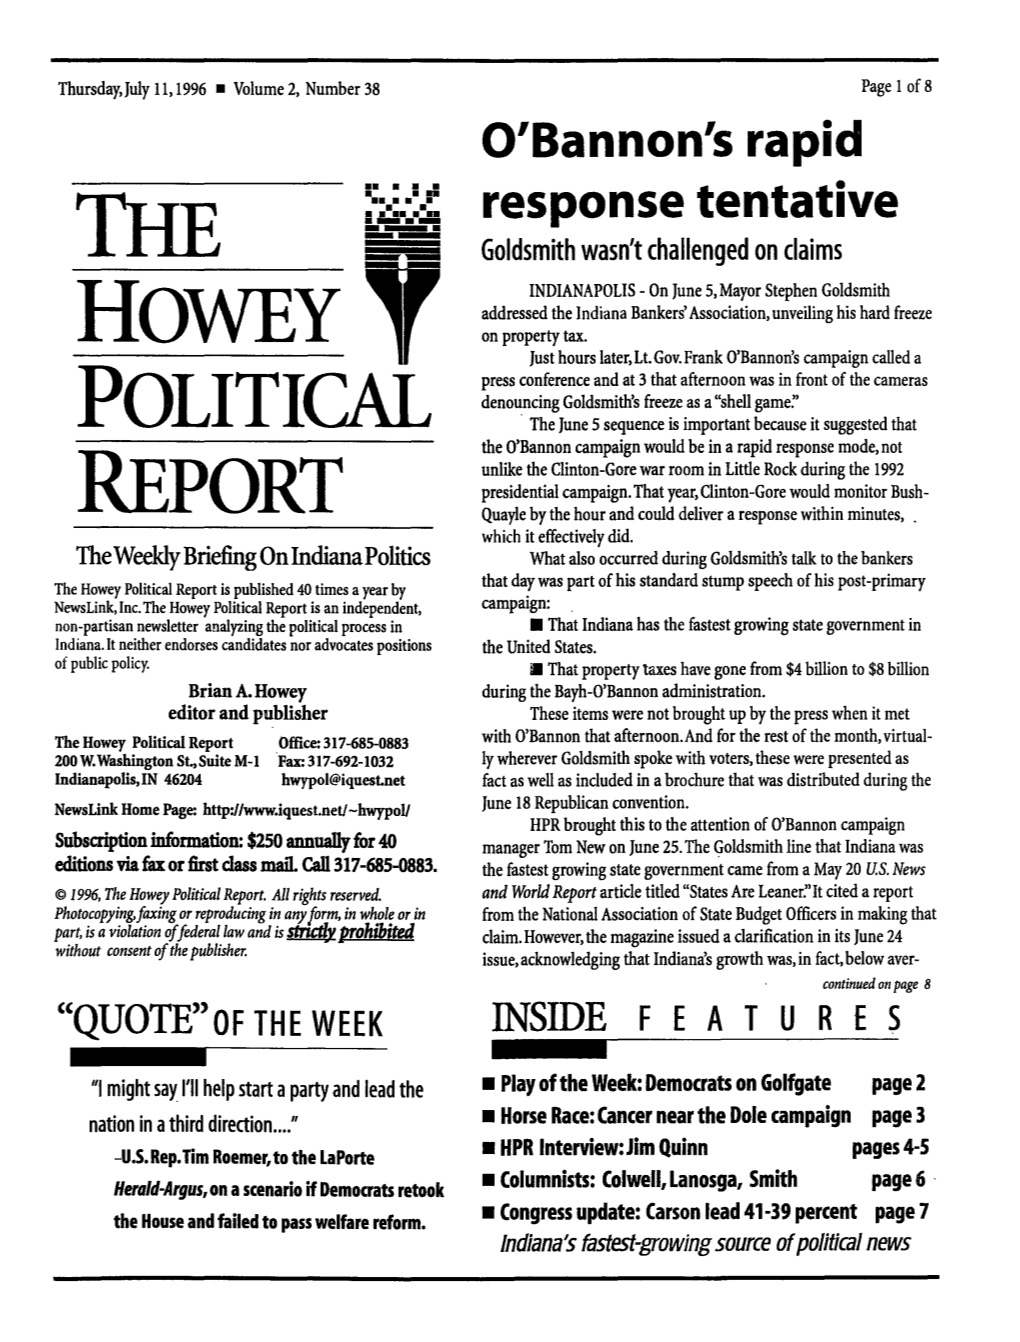 Howey Political Report Is Published 40 Times a Year by That Day Was Part of His Standard Stump Speech of His Post-Primary Newslink, Inc